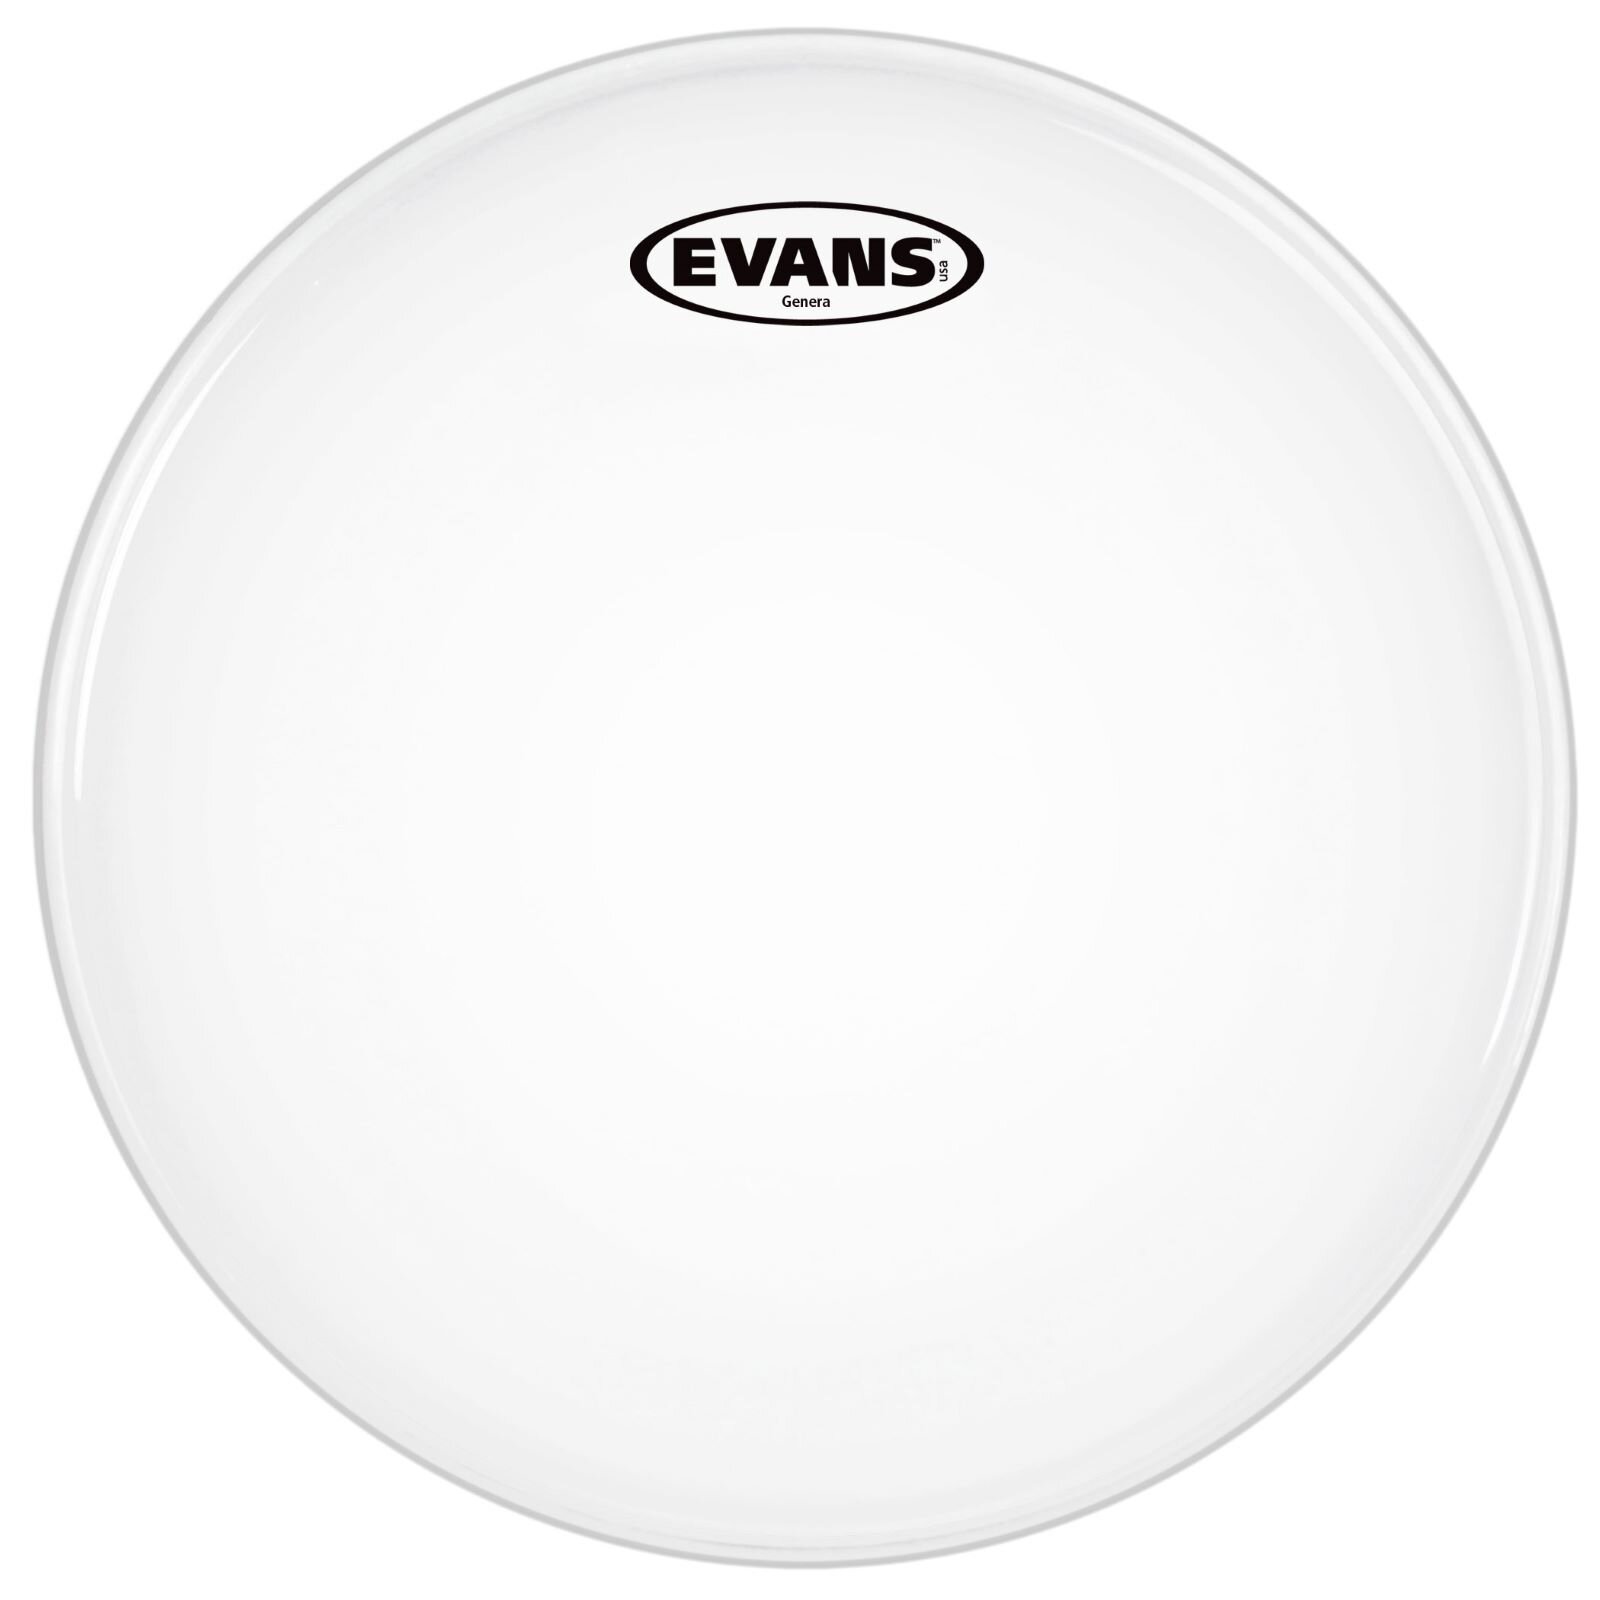 Evans Genera snare batter with muffle ring single ply coated white 12